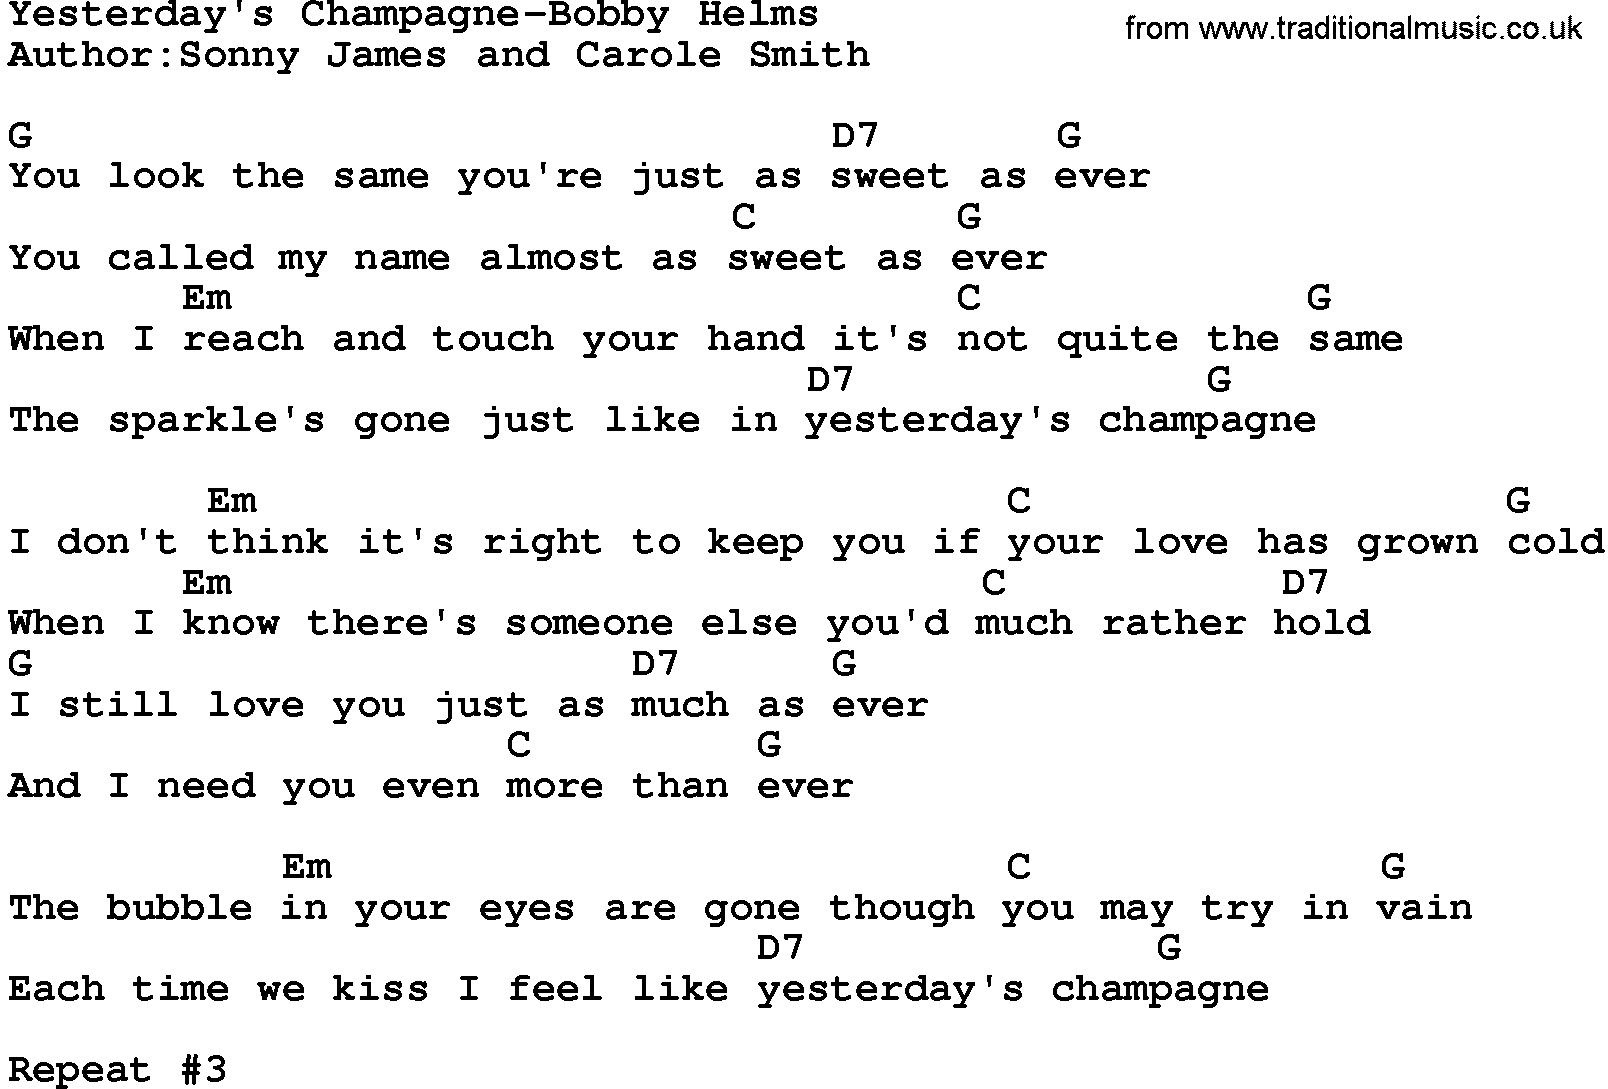 Country music song: Yesterday's Champagne-Bobby Helms lyrics and chords